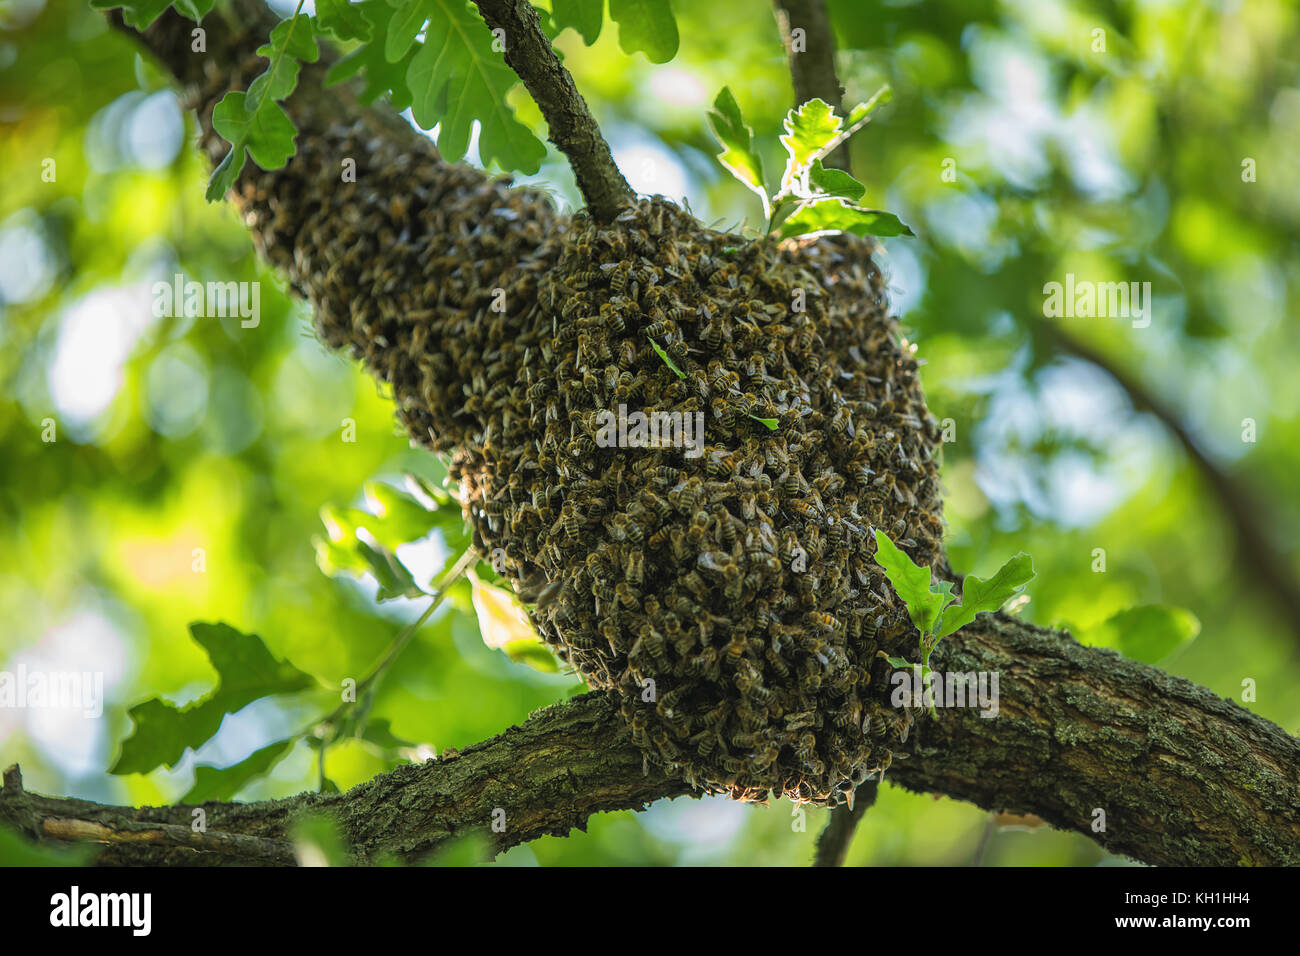 Honeybee swarm hanging at the tree in nature Stock Photo